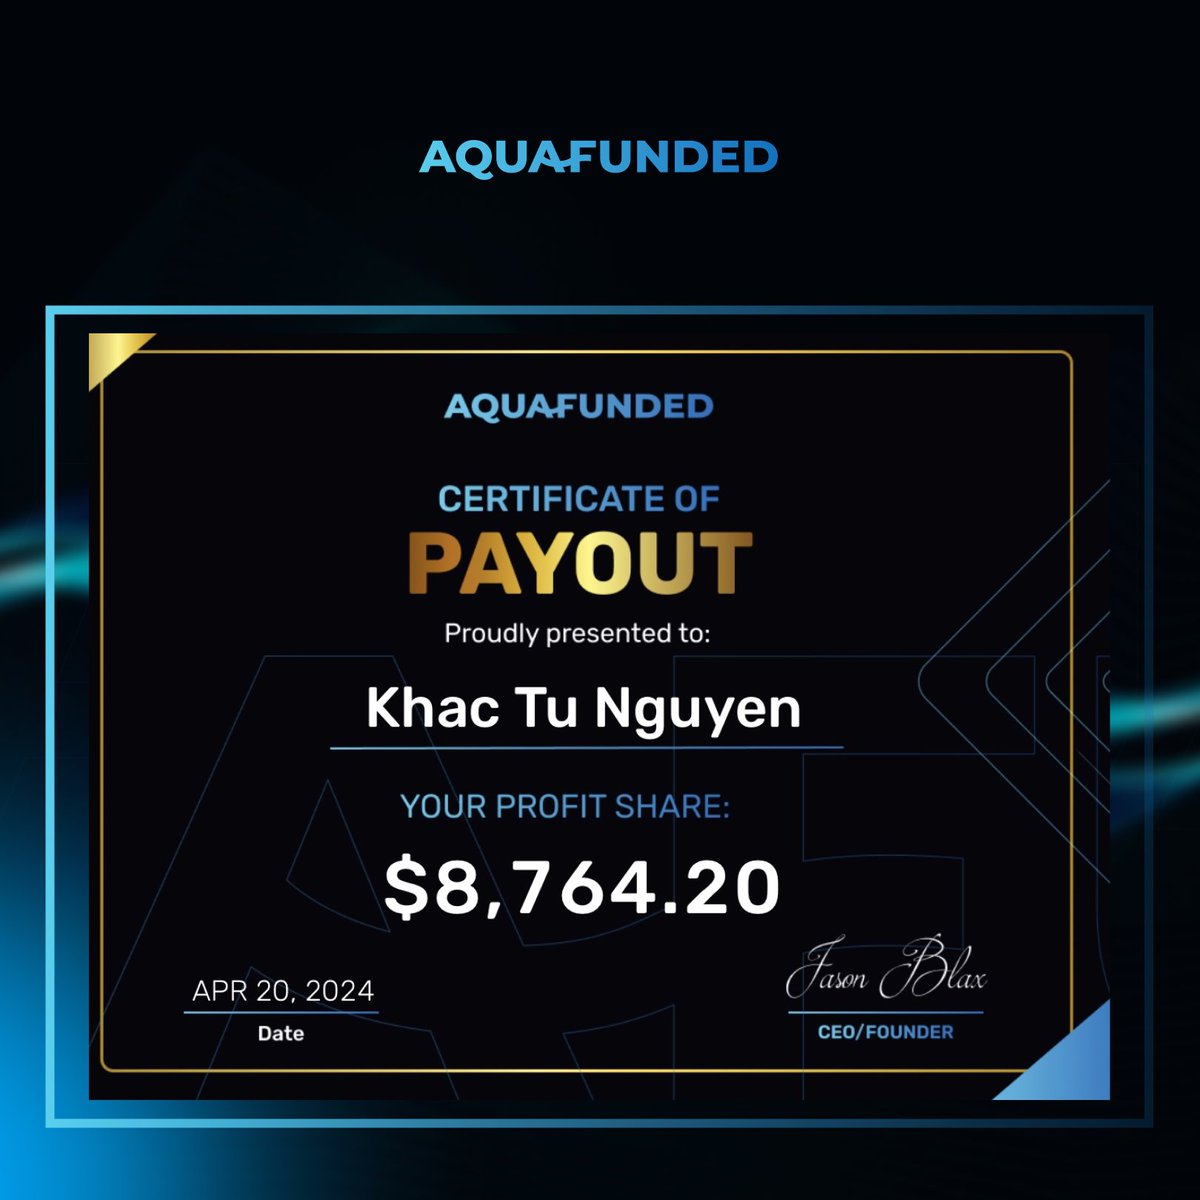 Congrats to Khac Tu Nguyen on the nearly $9k payout! 🌊